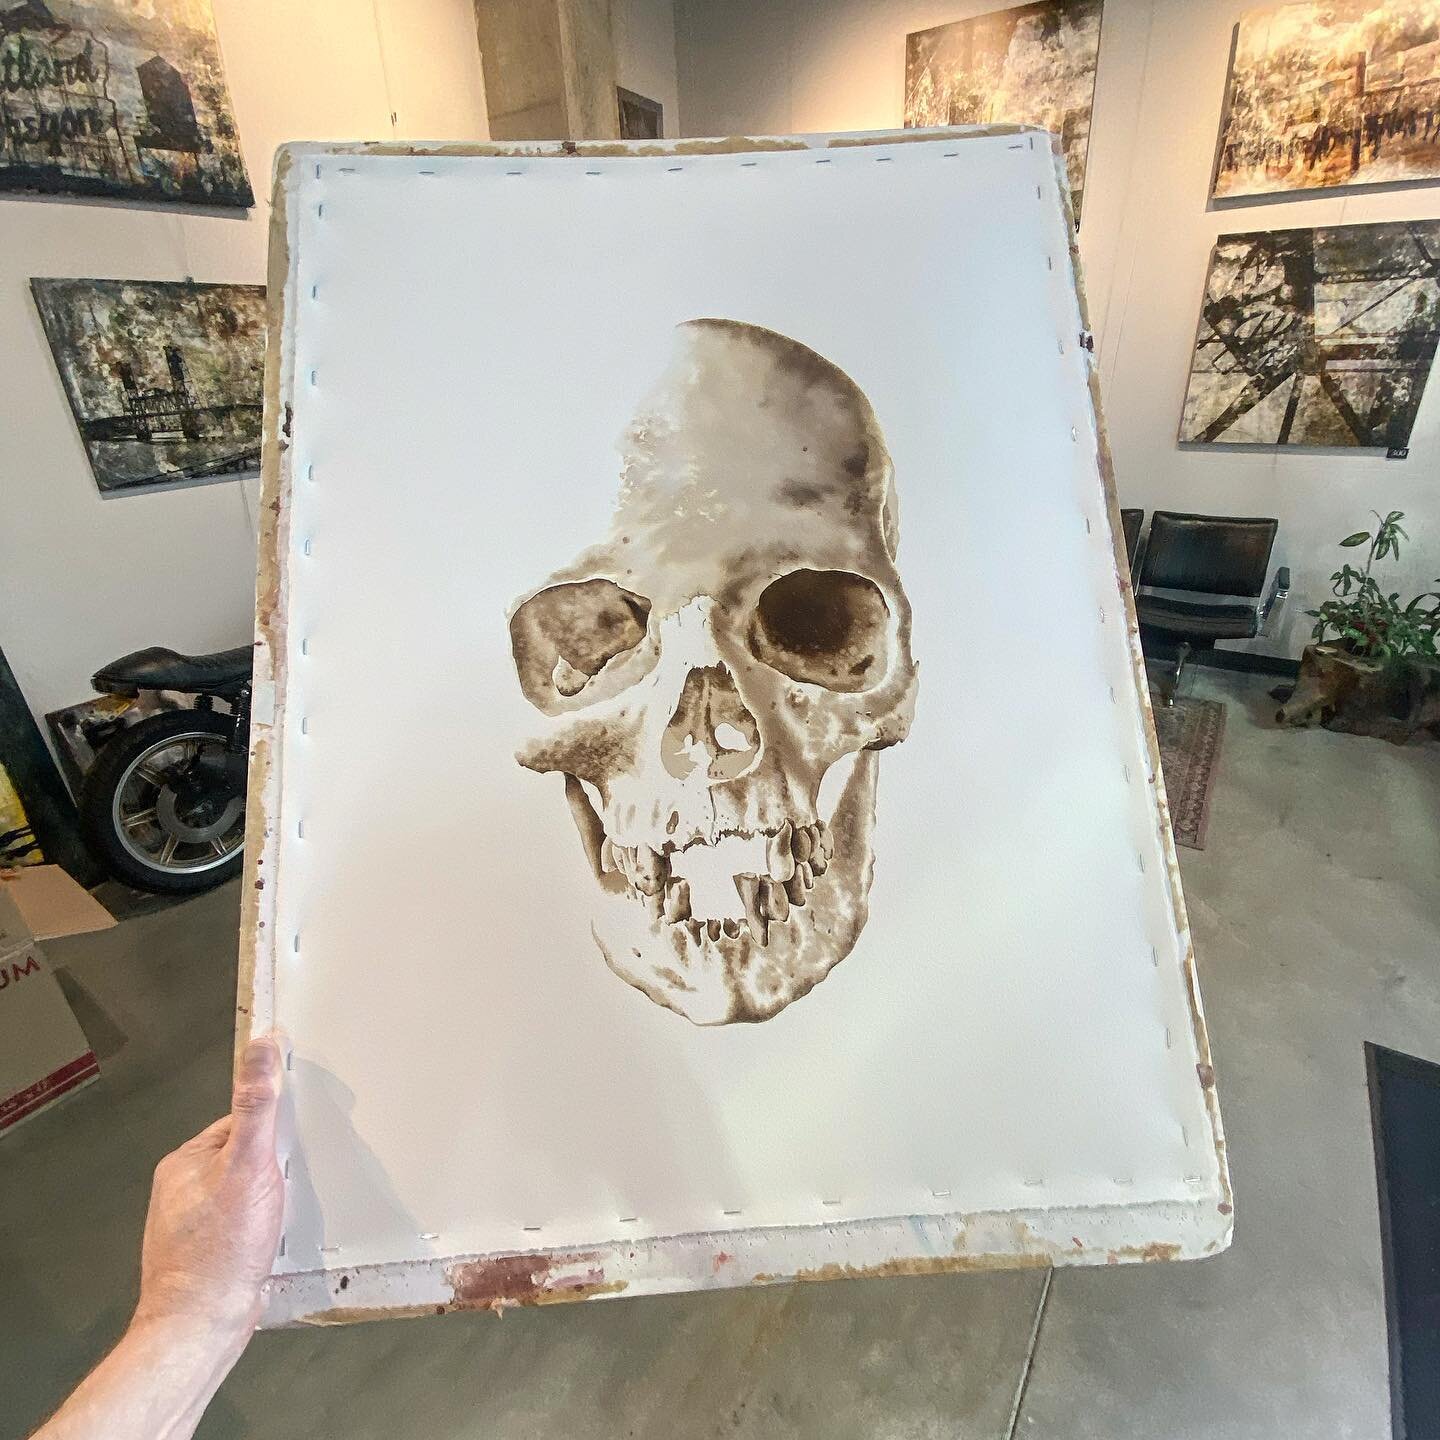 Always excited to see what @abeckerblack brings in next. This #skull is especially awesome! #bones #head #skullart #fineart #art #printing #prints #pdxart #pdxartist #pdx #local #smallbusiness #portland #oregon #pnw #artwork #print #photo #photograph